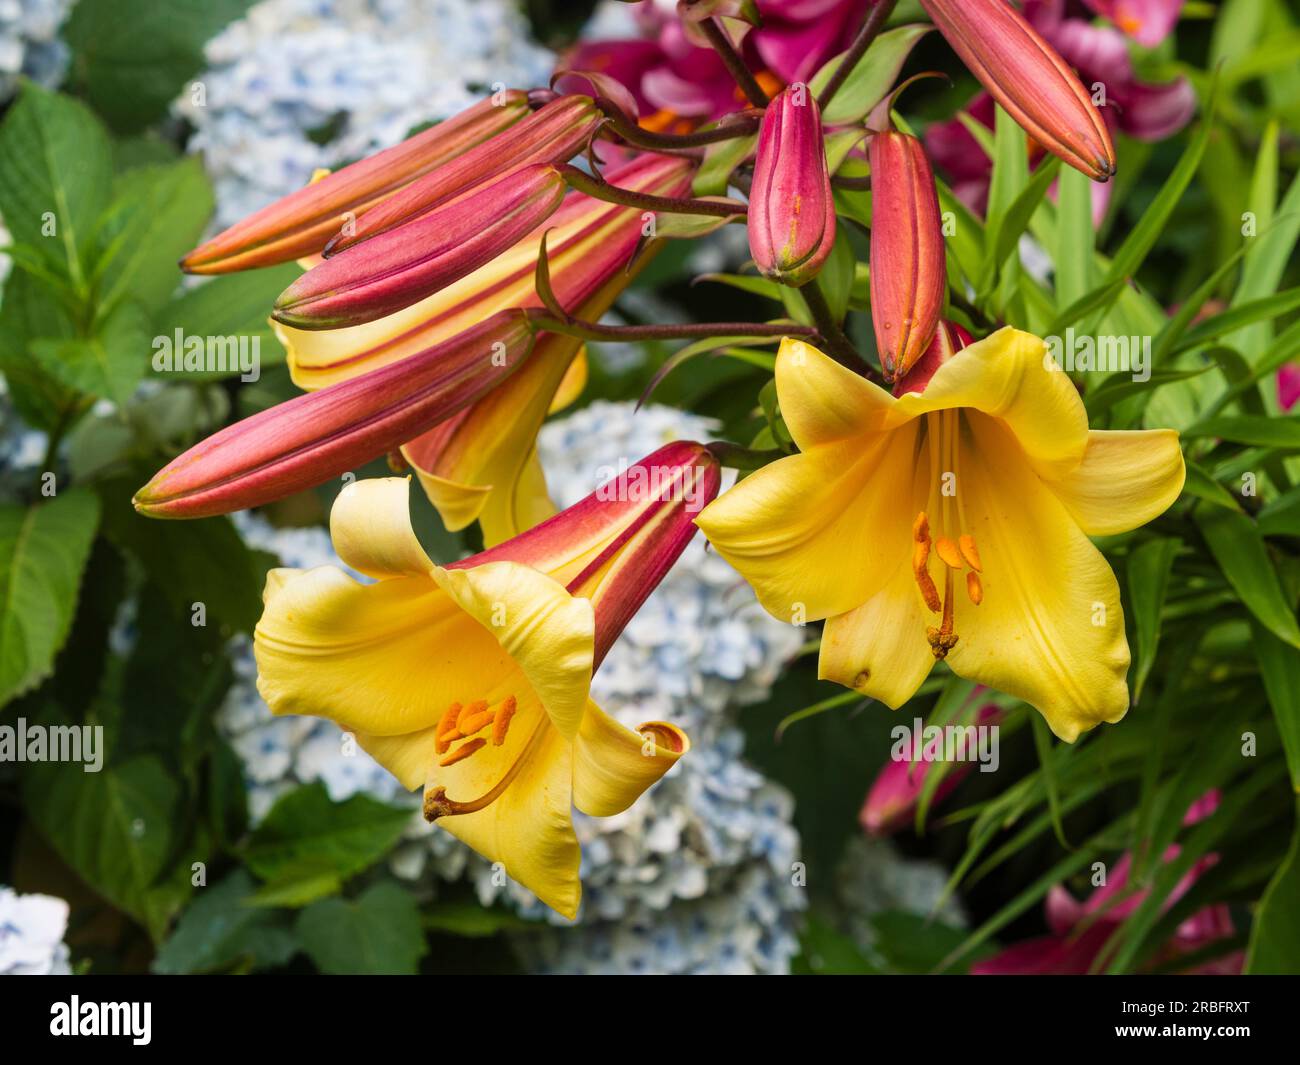 Fragrant golden trumpet flowers and red buds of the hardy lily, Lilium 'Golden Splendour' Stock Photo